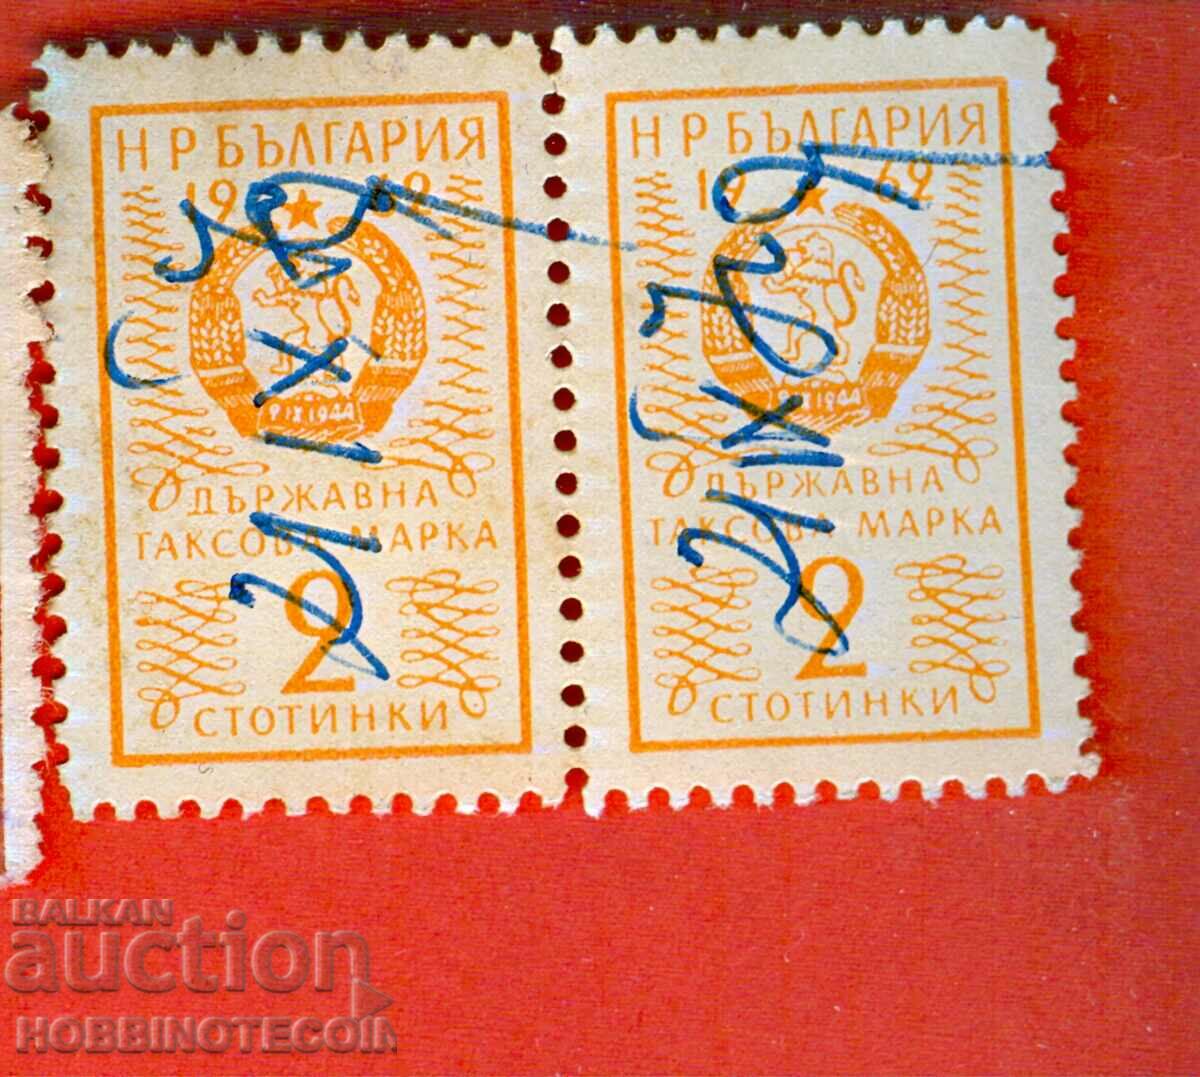 BULGARIA TAX STAMPS TAX STAMP 2 x 2 Cents - 1962